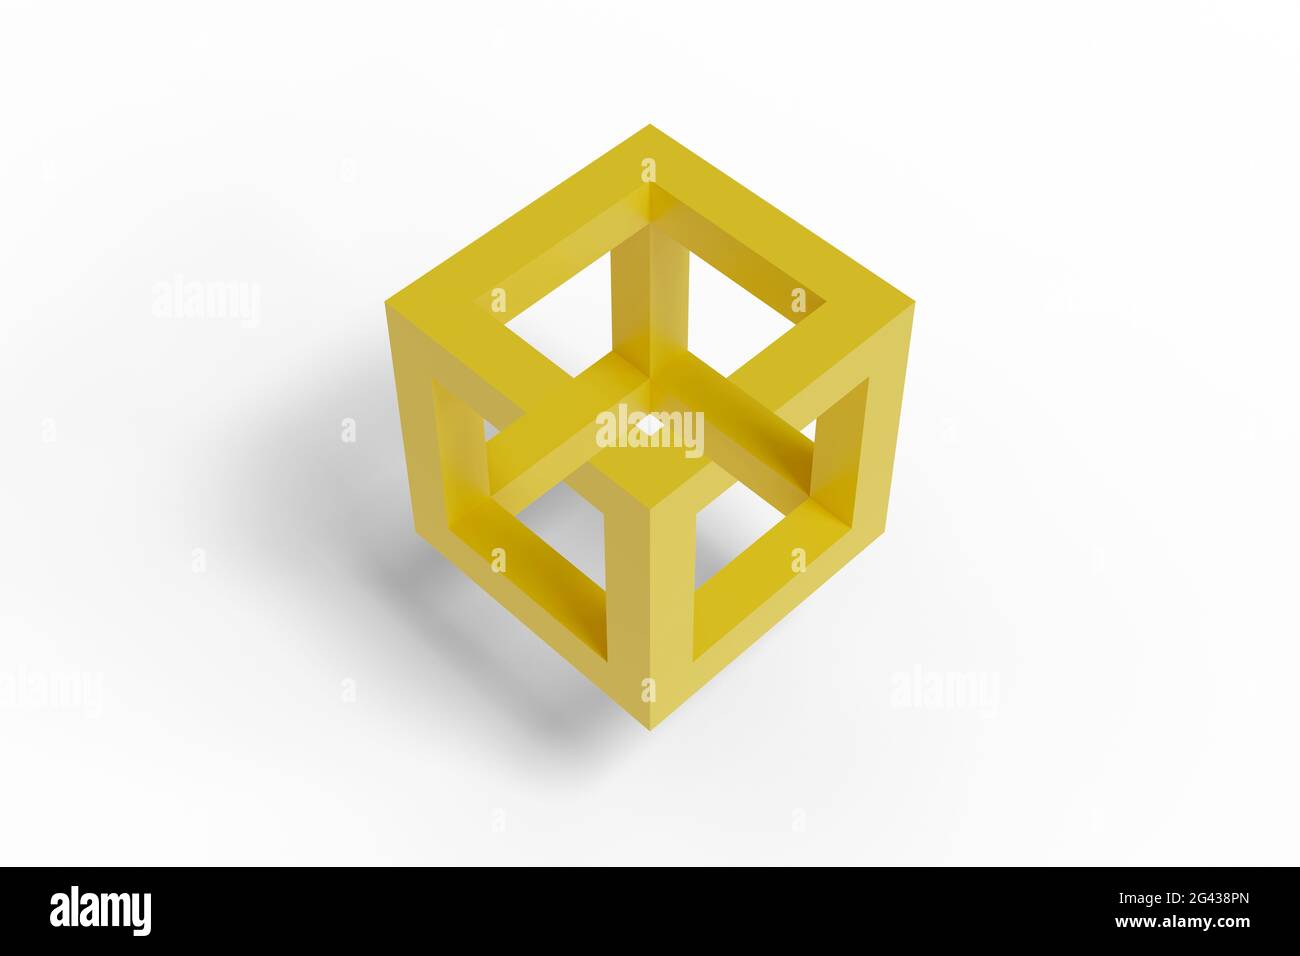 Impossible cube isolated on white background. 3d illustration. Stock Photo